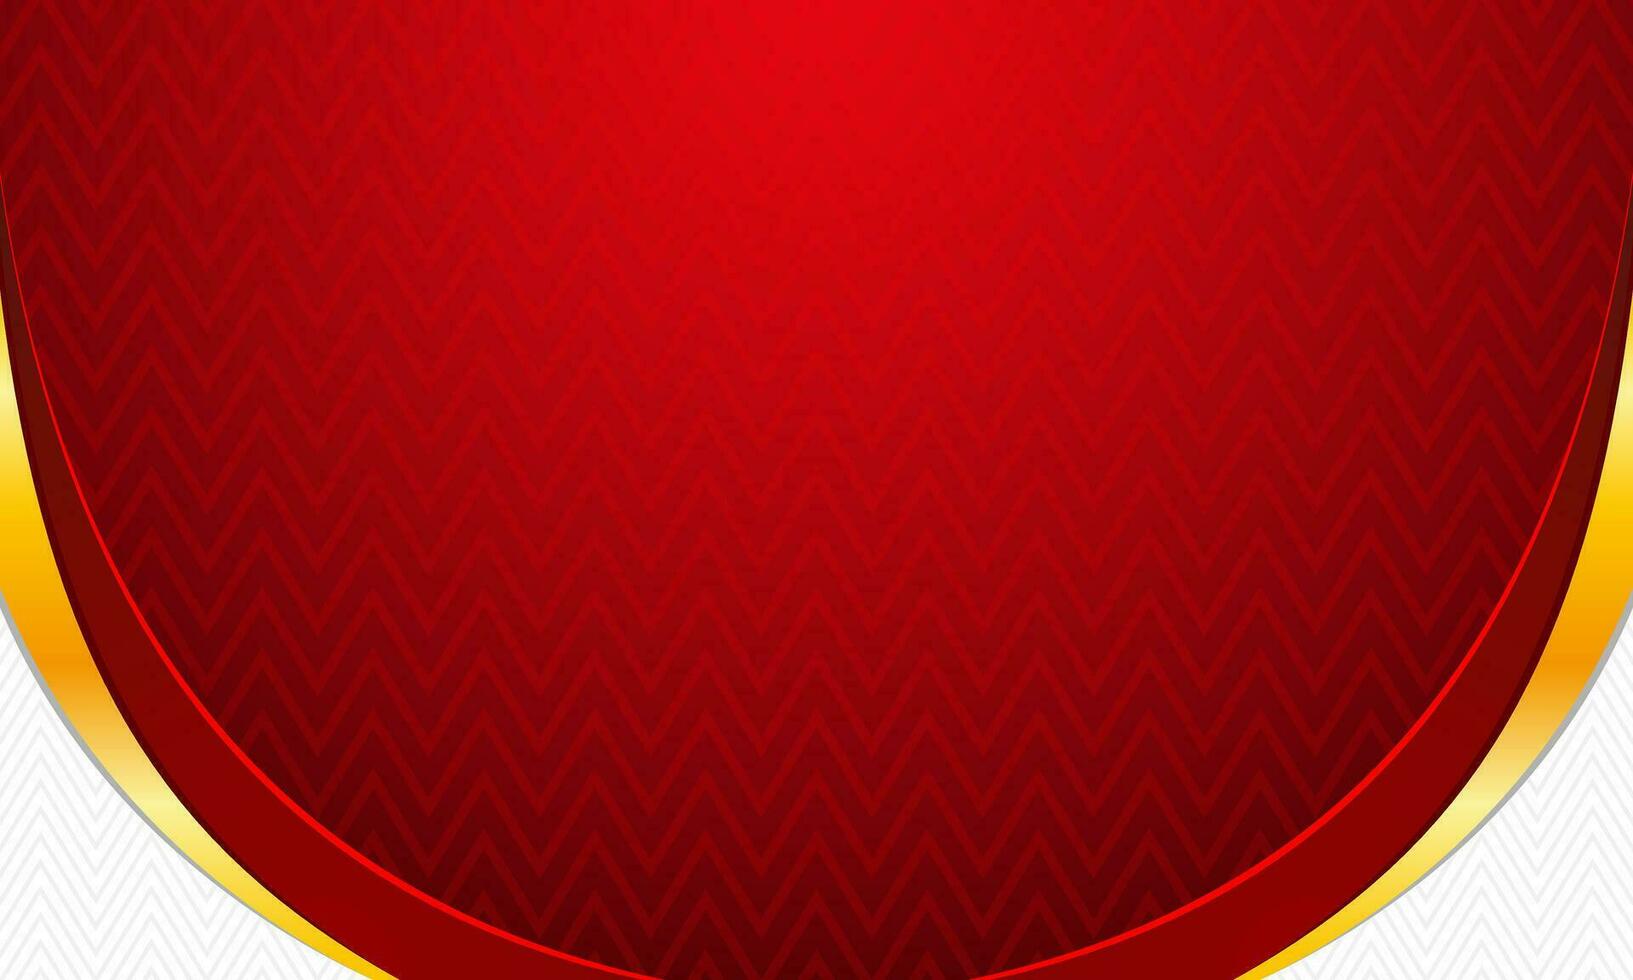 Luxury red and white background with gold accent vector